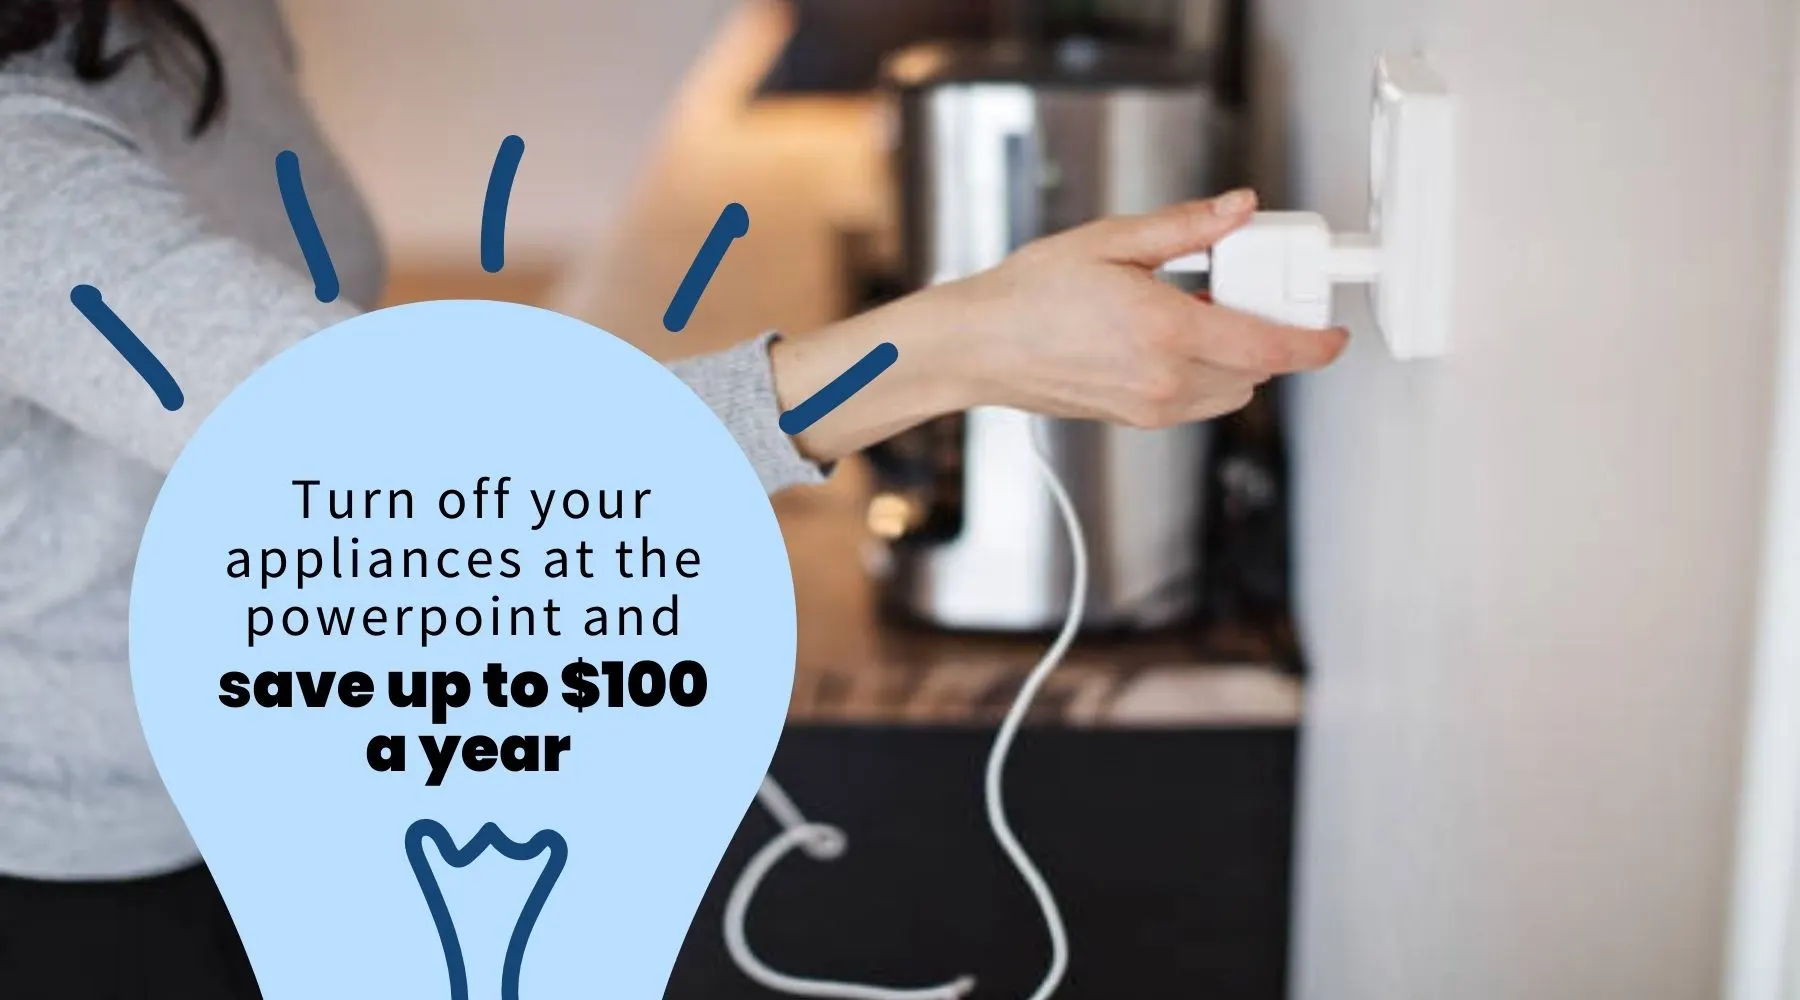  Turn off your appliances at the powerpoint and save up to $100 a year